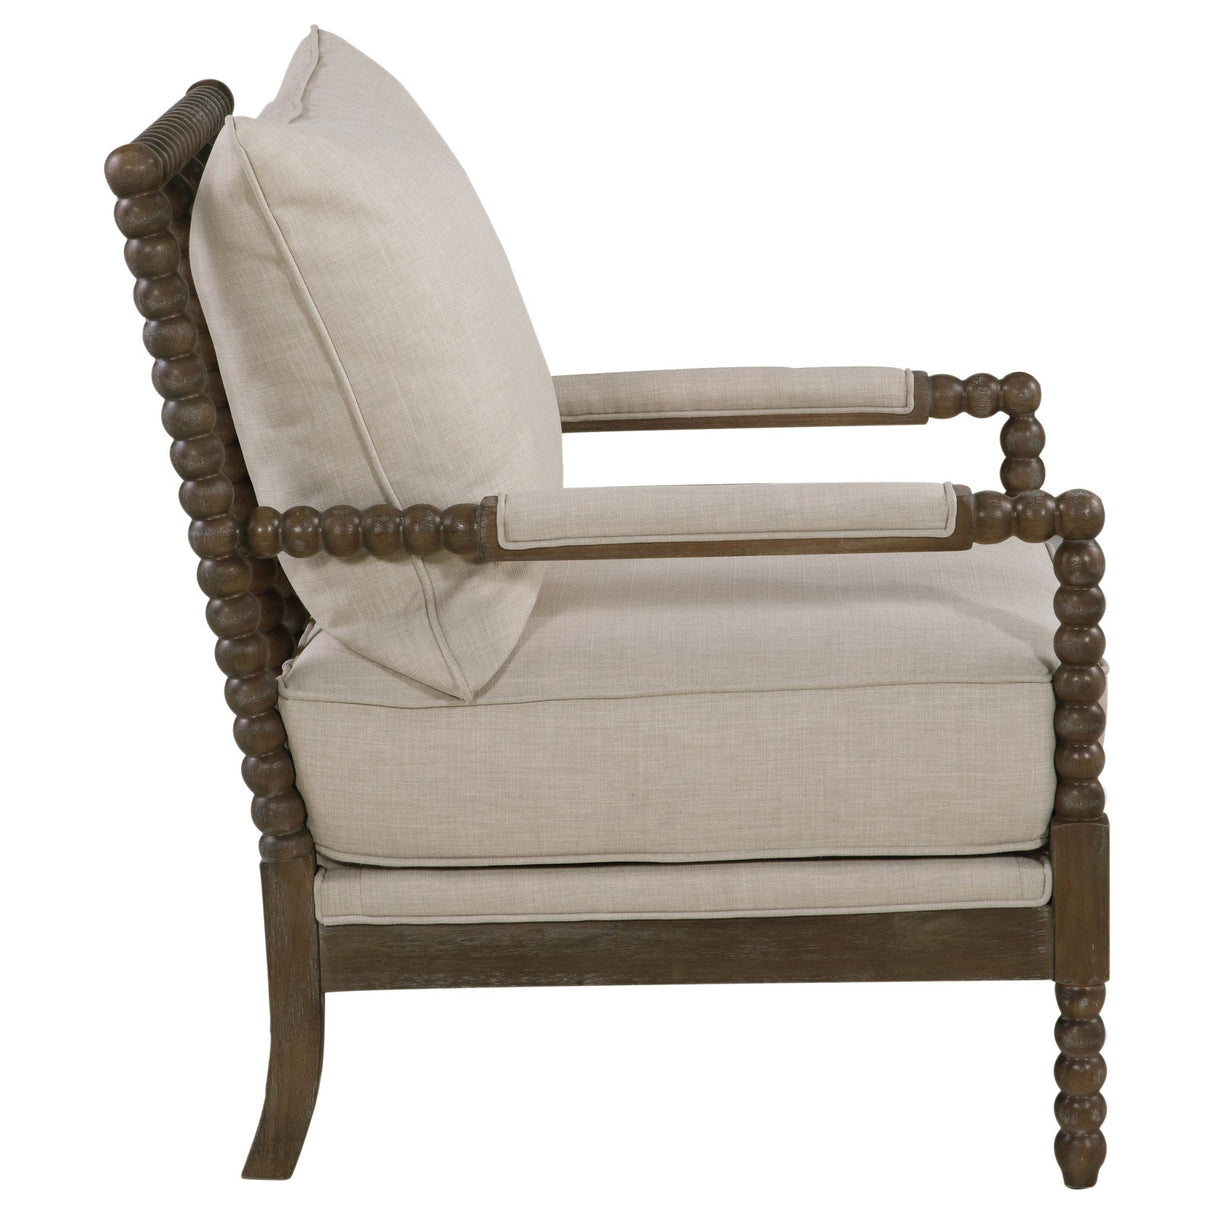 Accent Chair - Blanchett Cushion Back Accent Chair Beige and Natural - Accent Chairs - 905362 - image - 9